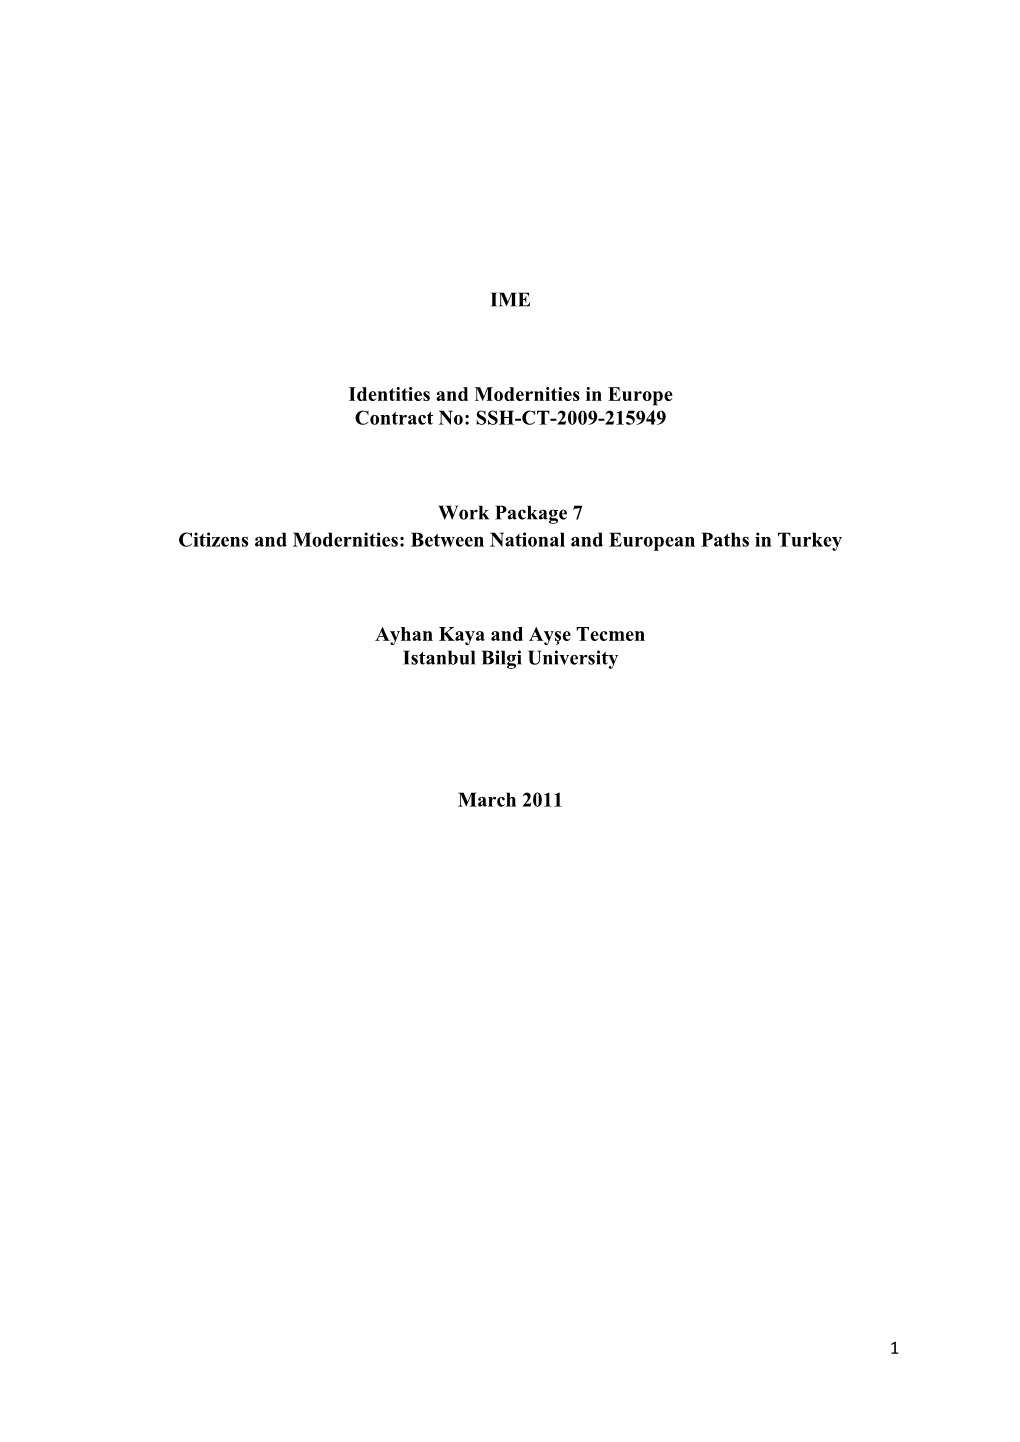 IME Identities and Modernities in Europe Contract No: SSH-CT-2009